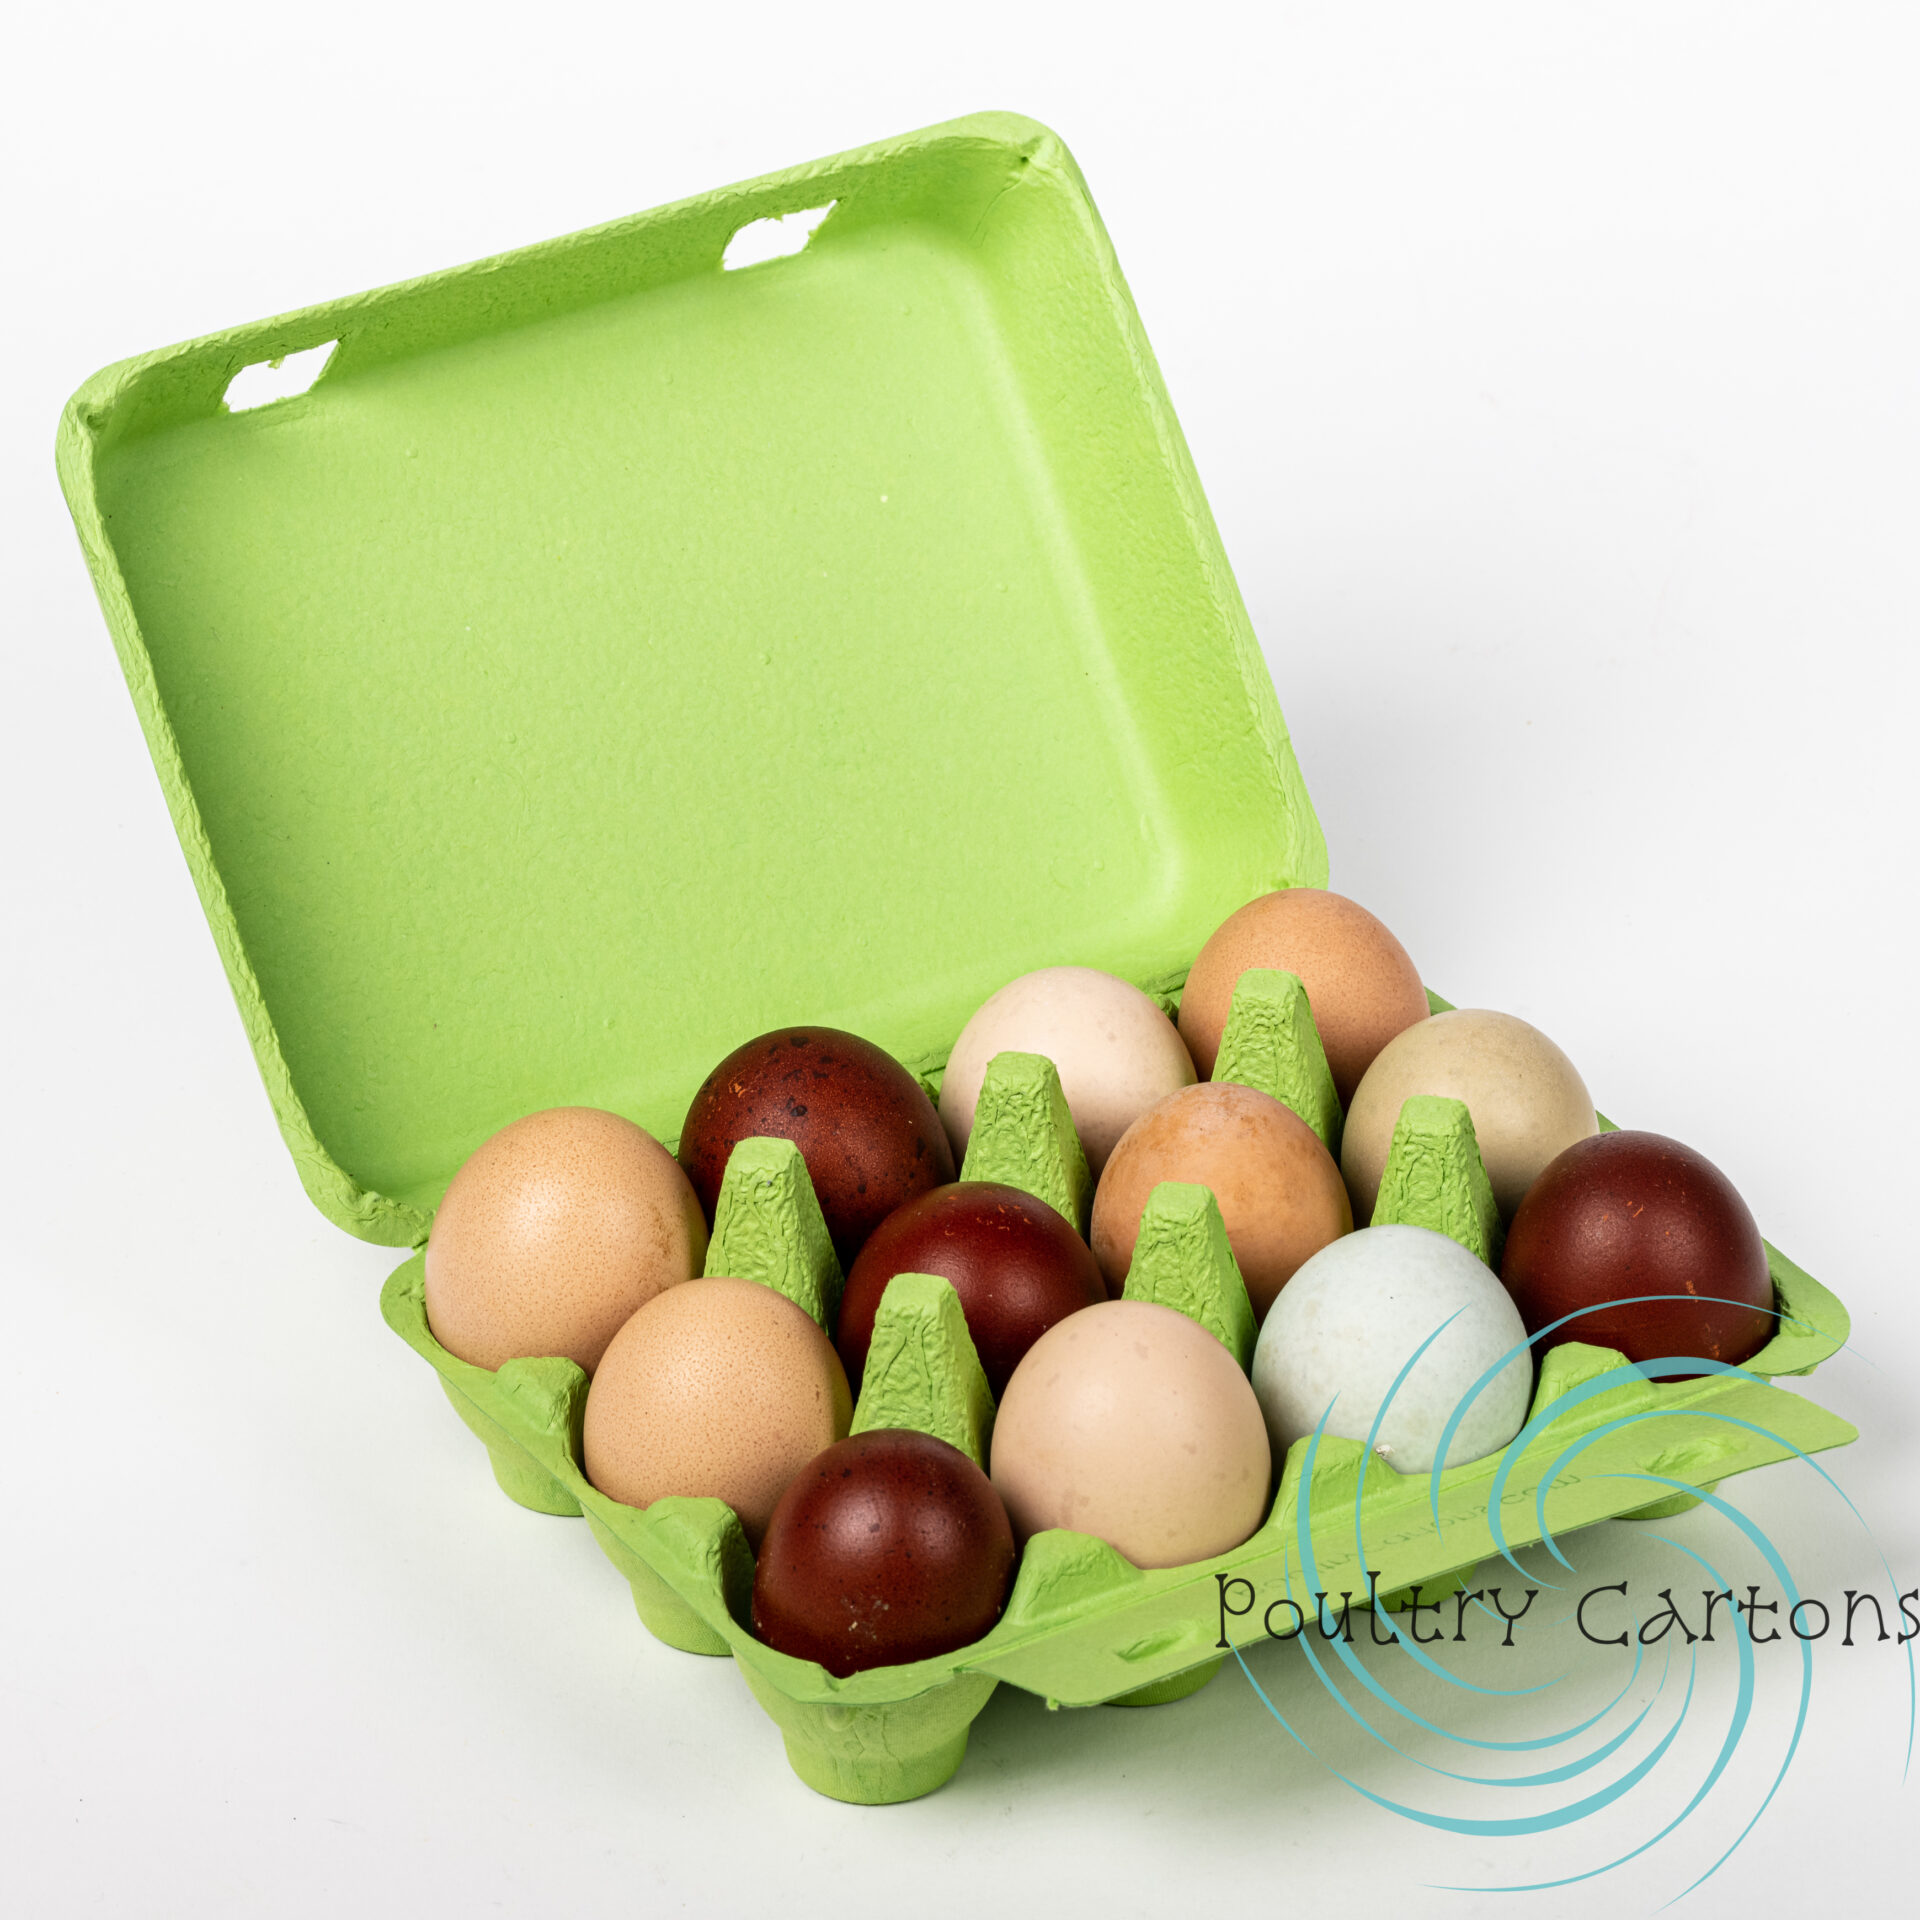 Cornucopia Cardboard Egg Cartons (12-Pack); Each for One Dozen,  Eco-friendly Recycled Material Biodegradable 12-count Egg Cartons w/Labels